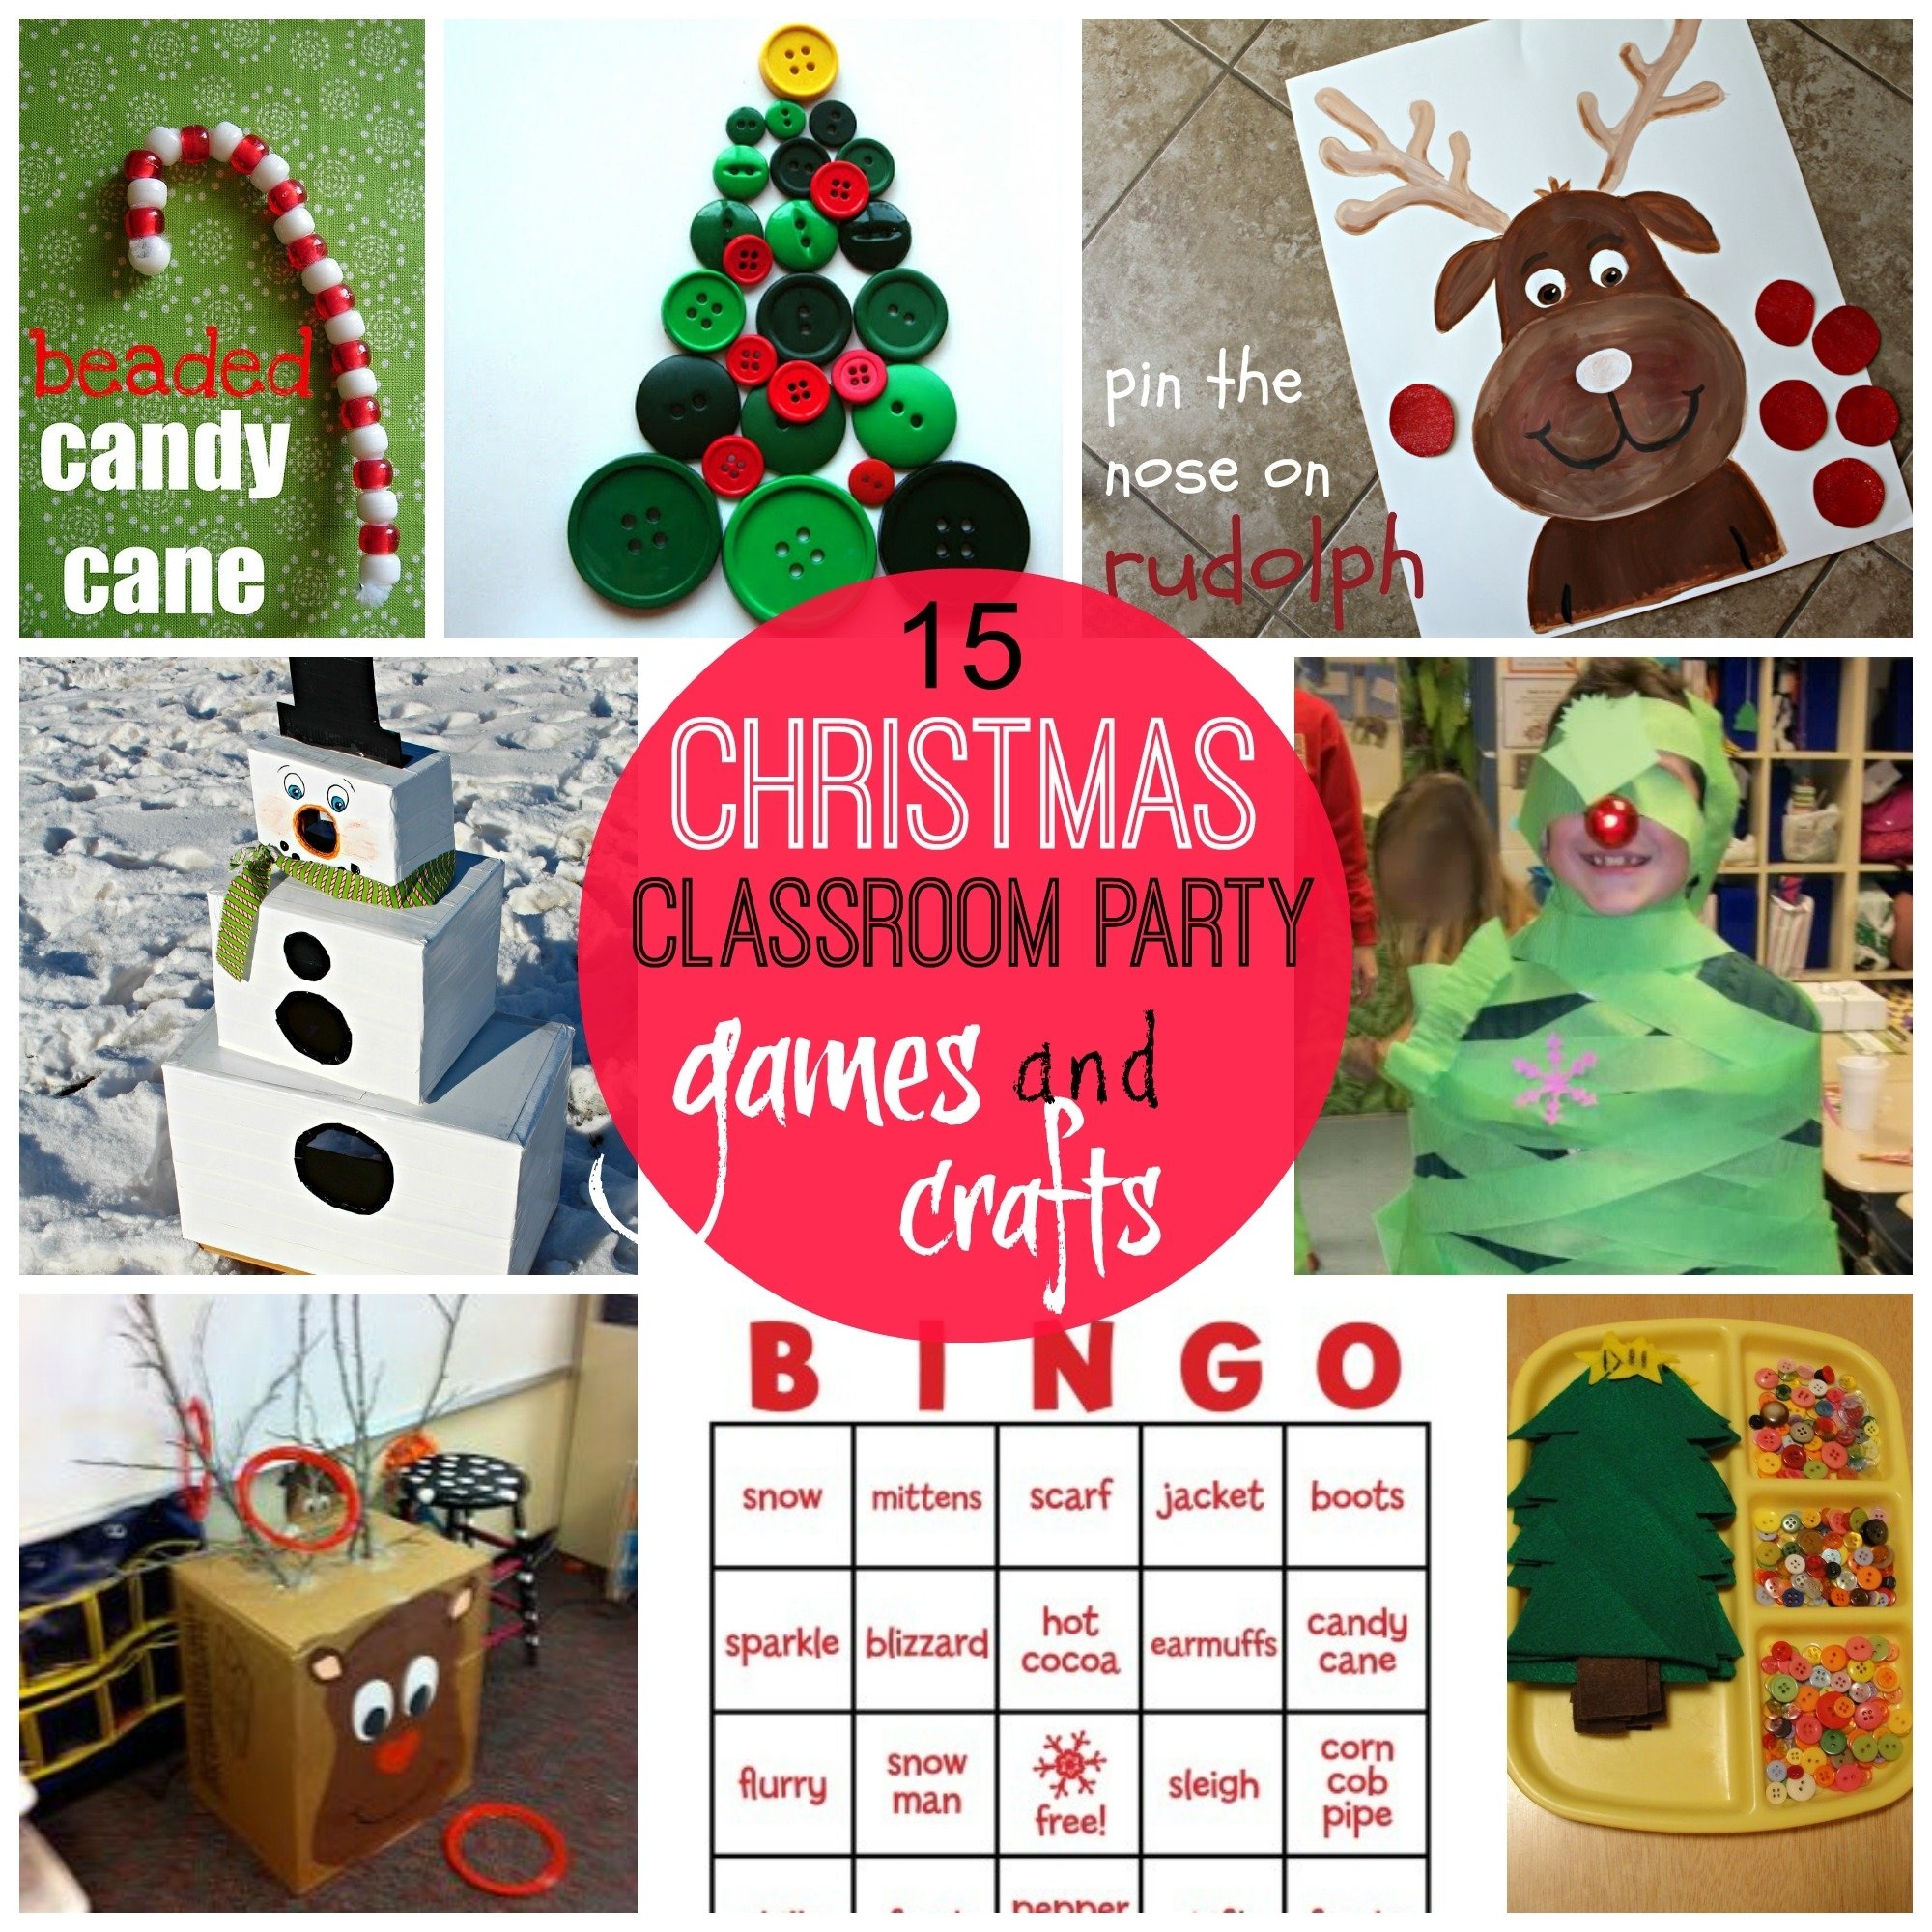 10 Attractive Ideas For A Christmas Party games for christmas classroom parties a girl and a glue gun 2022